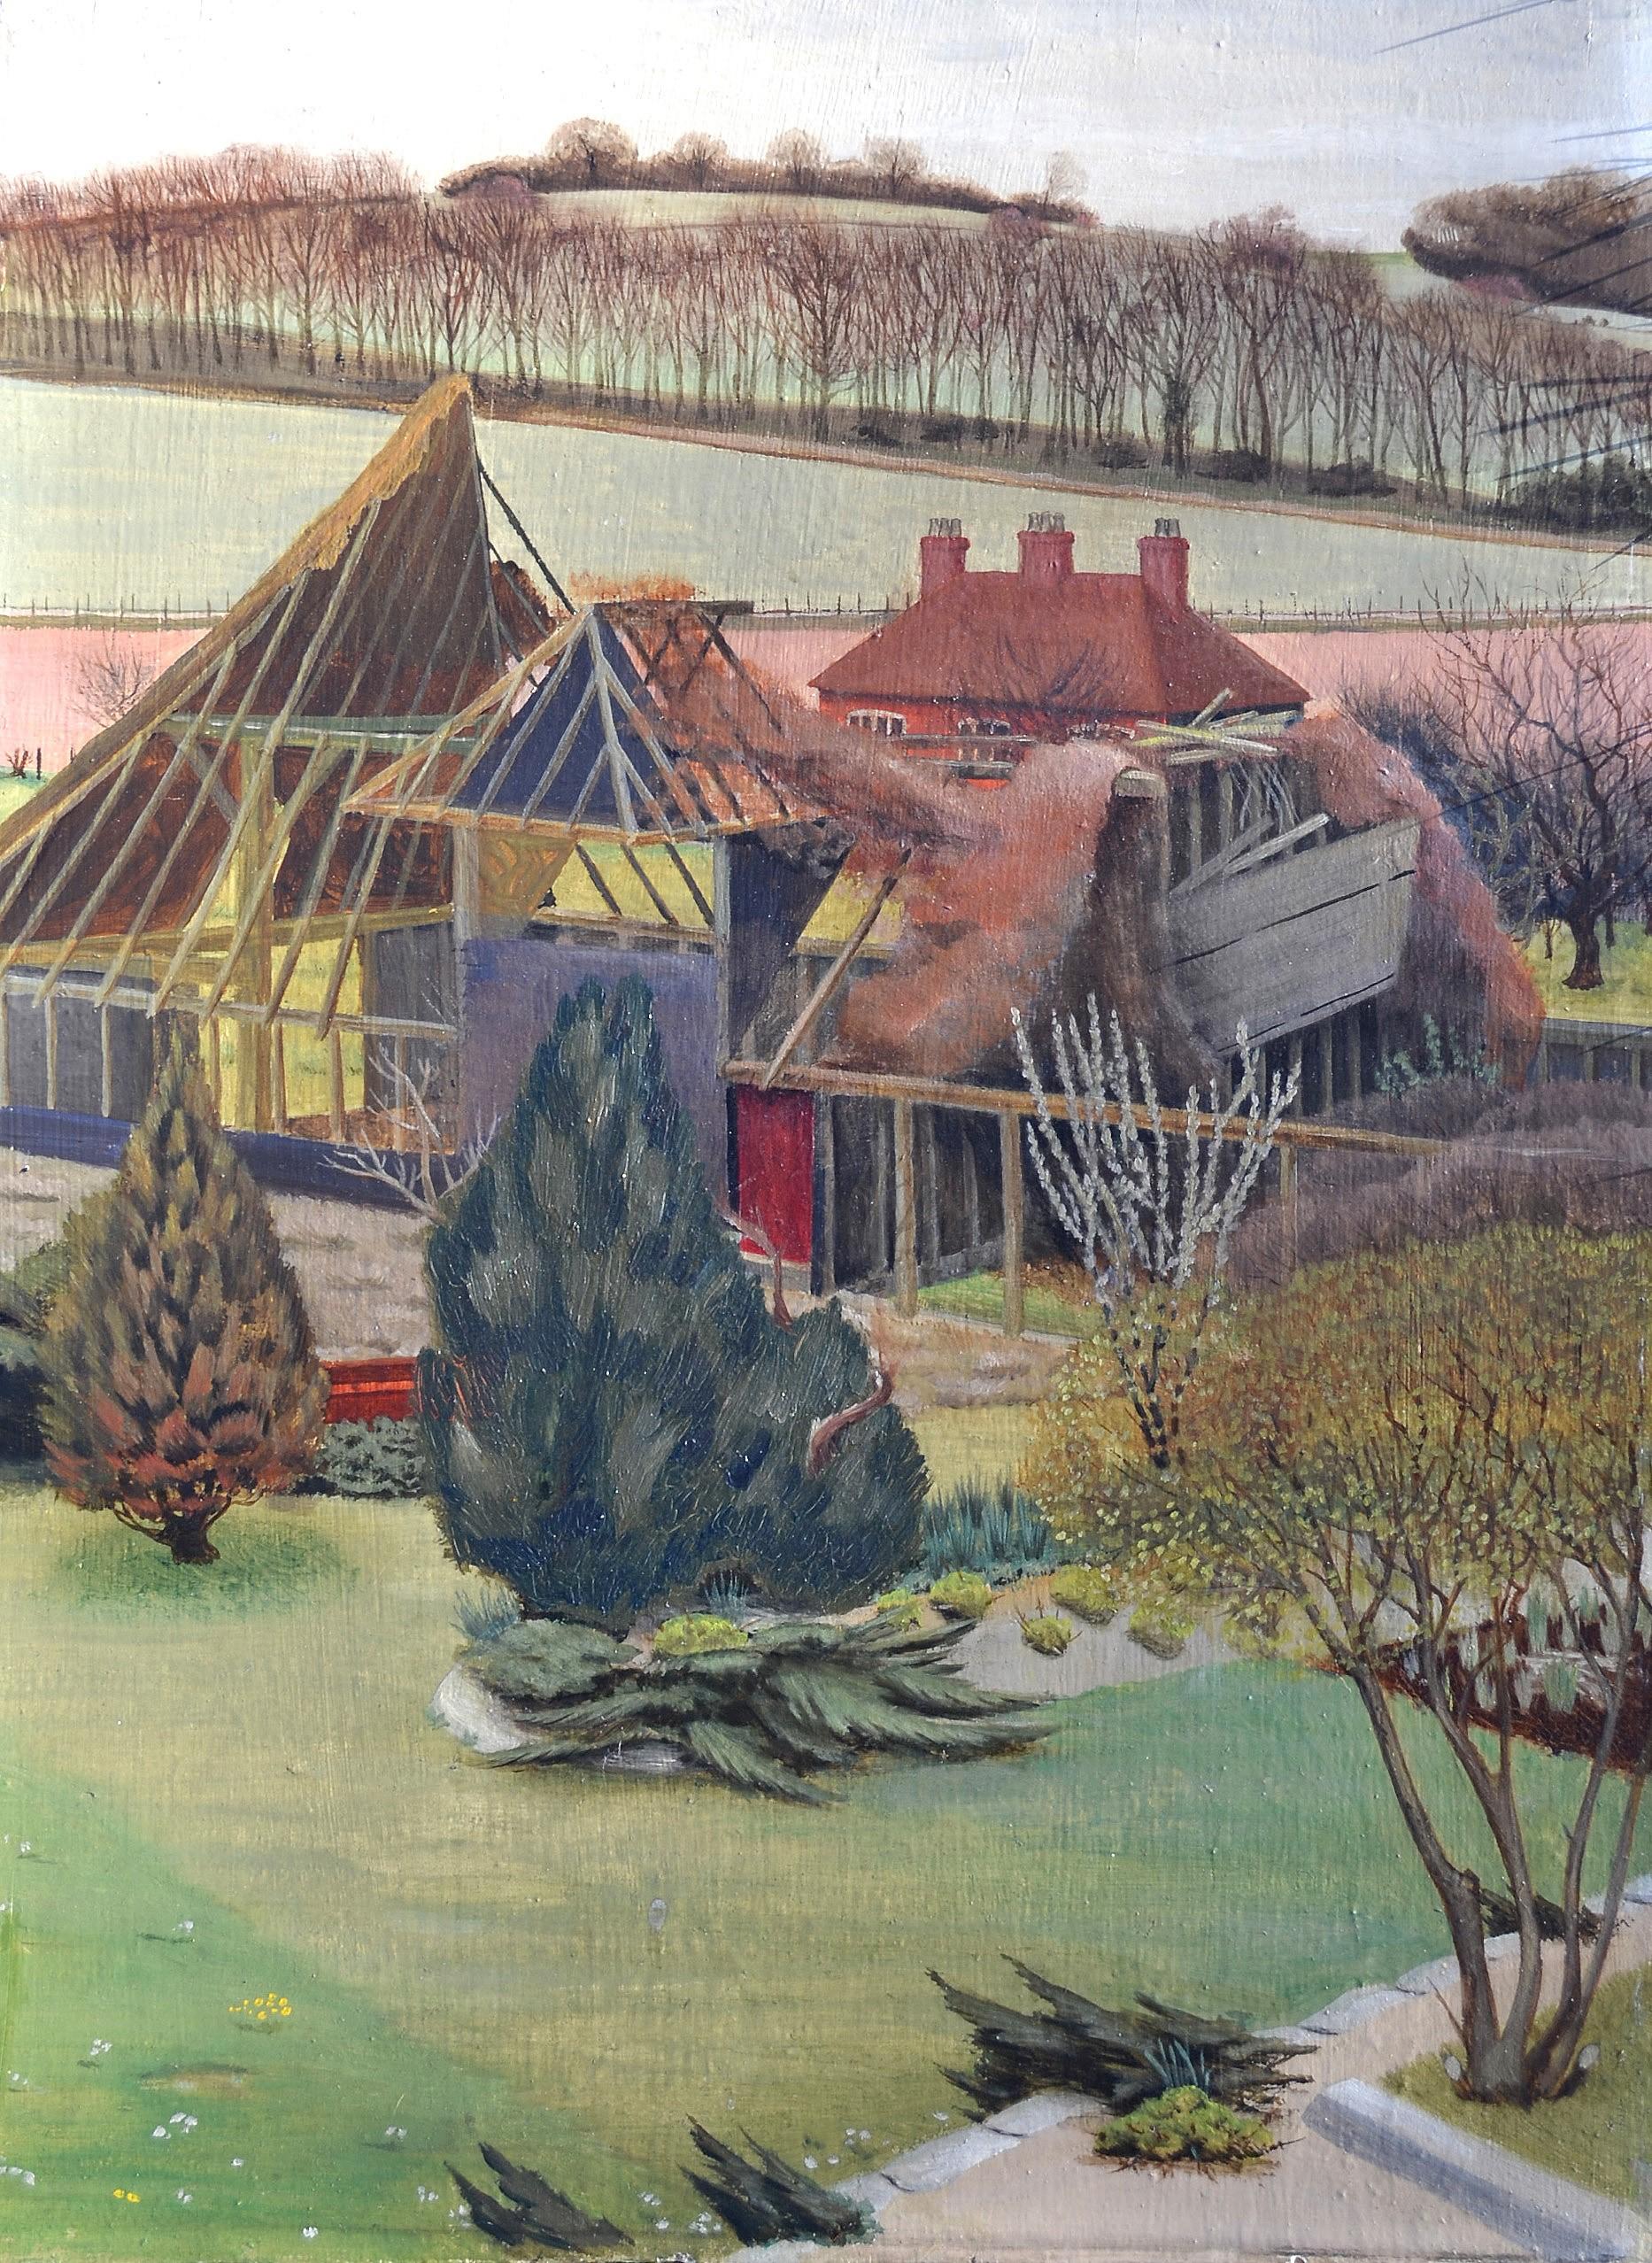 View from a Bedroom Window, 20th Century English School, paysage à l'huile